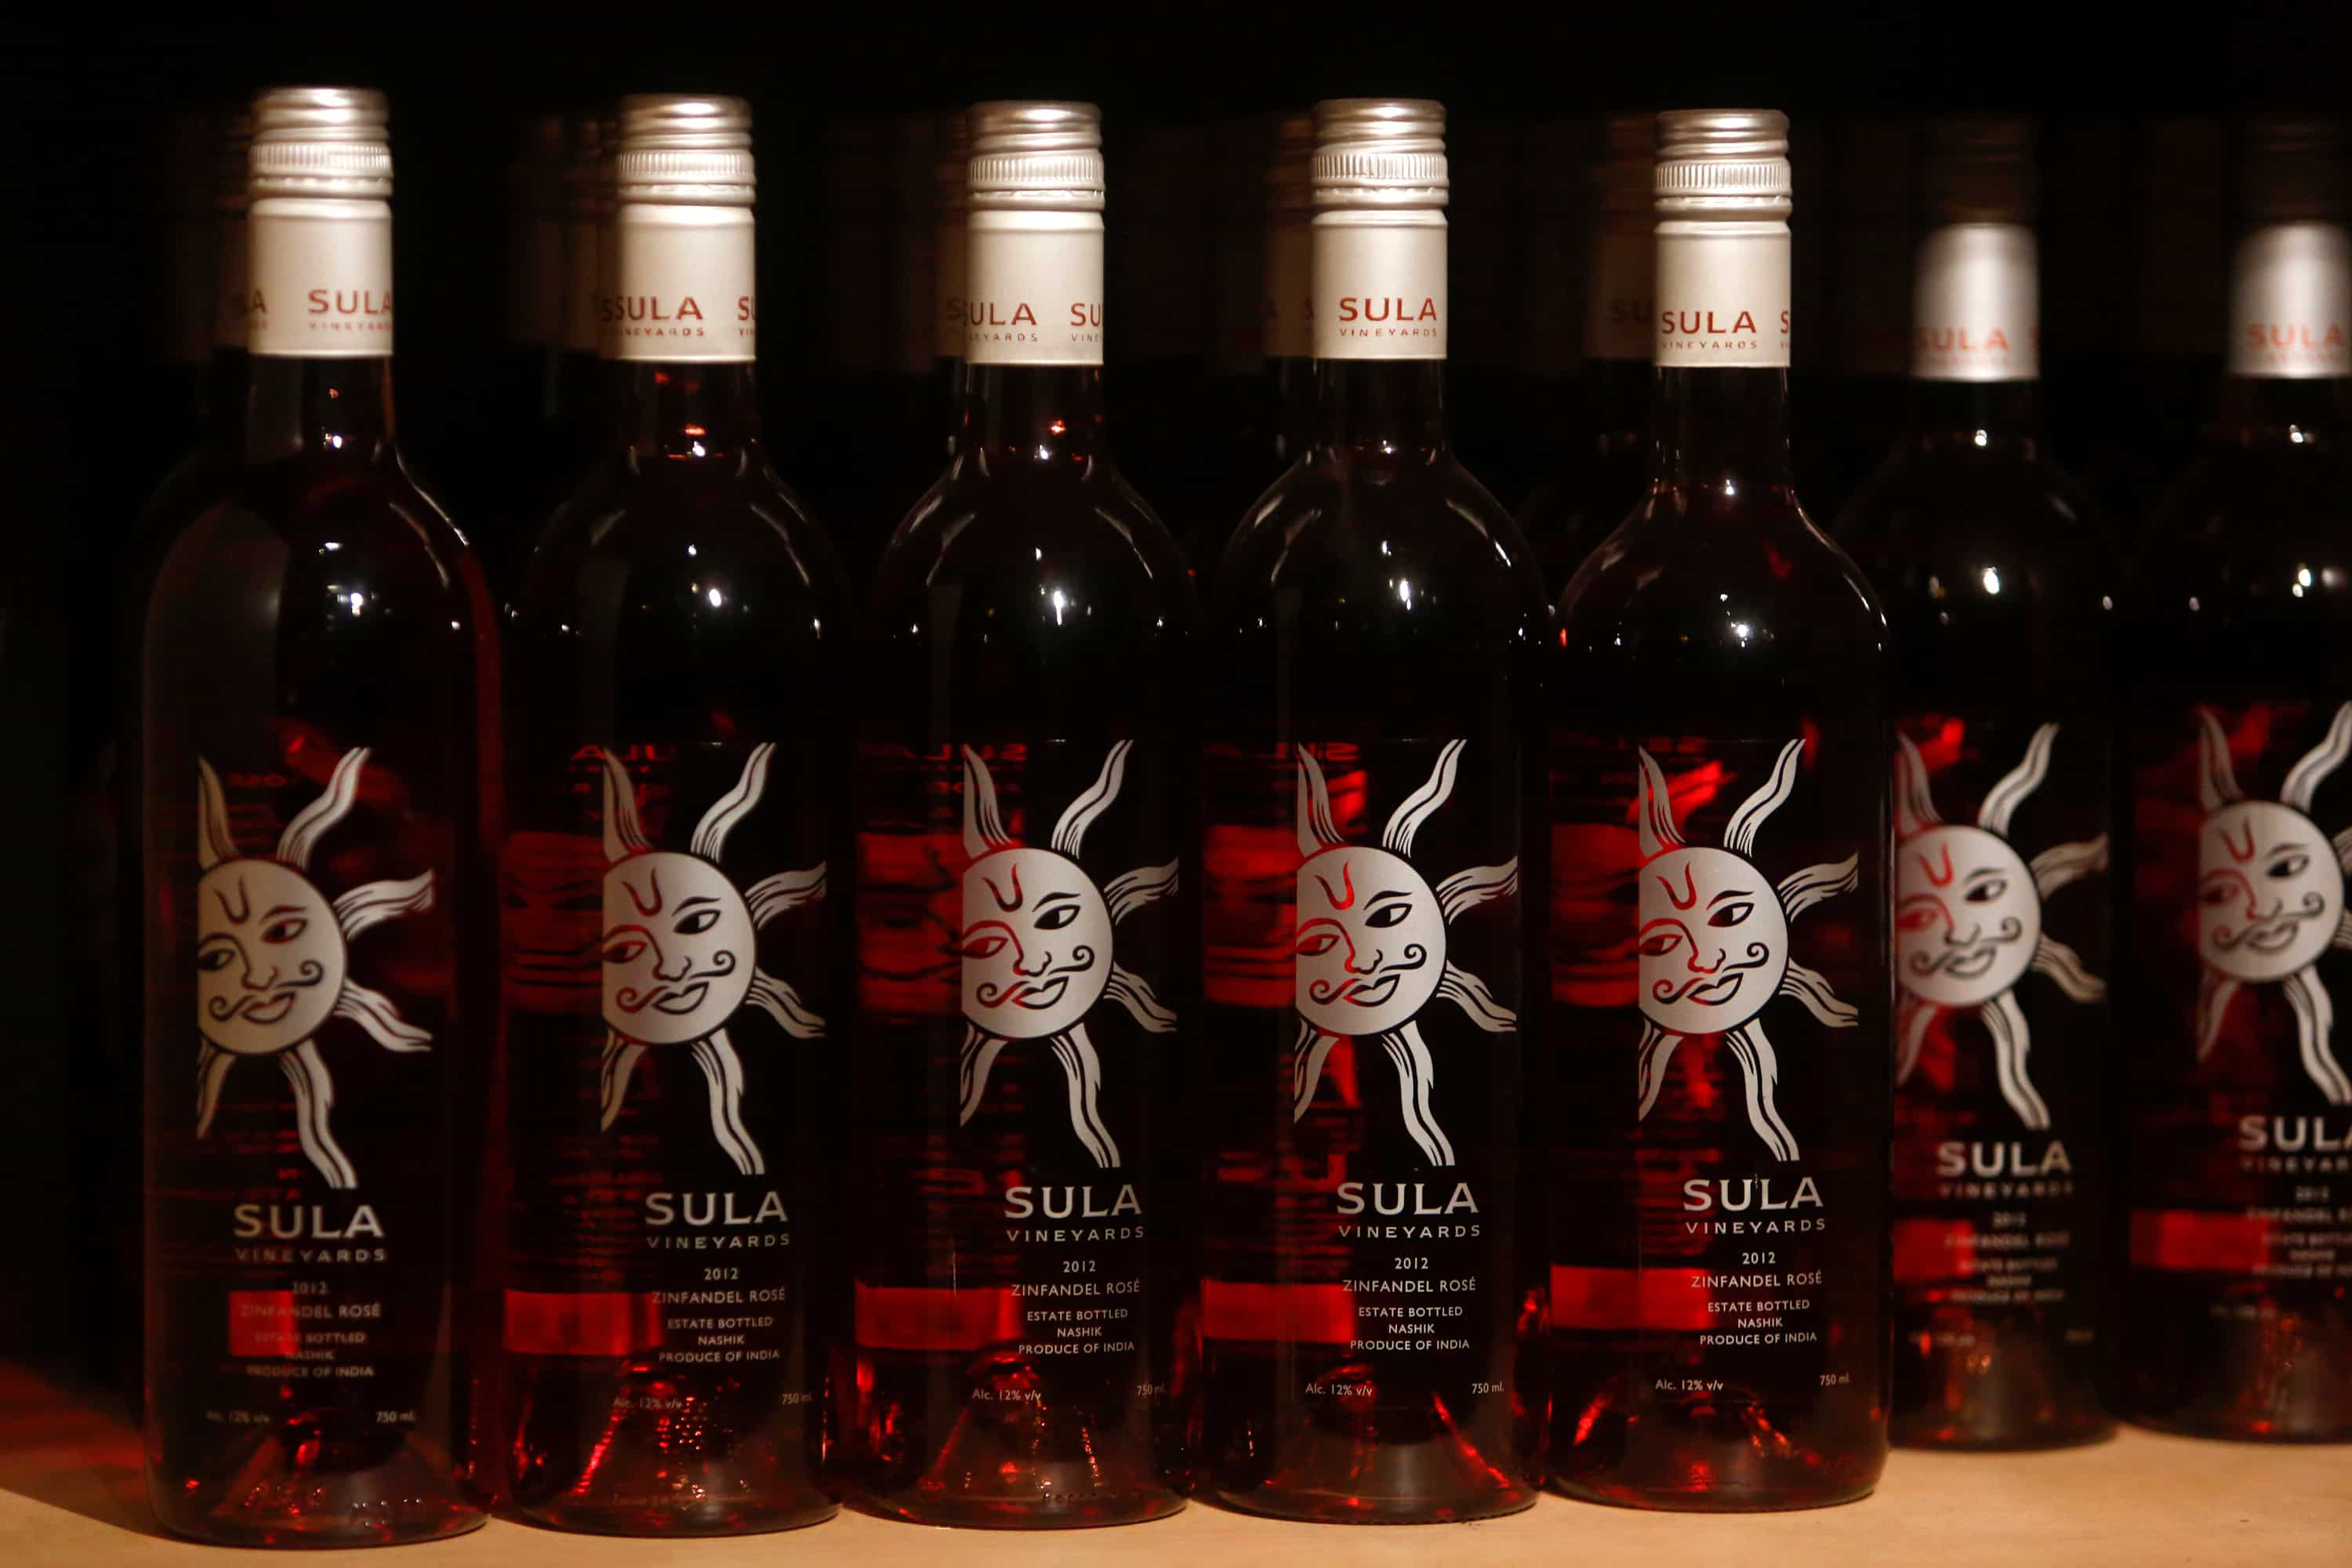 Sula Vineyards Q4 results: Net profit falls 4.85% to Rs 13.55 crore